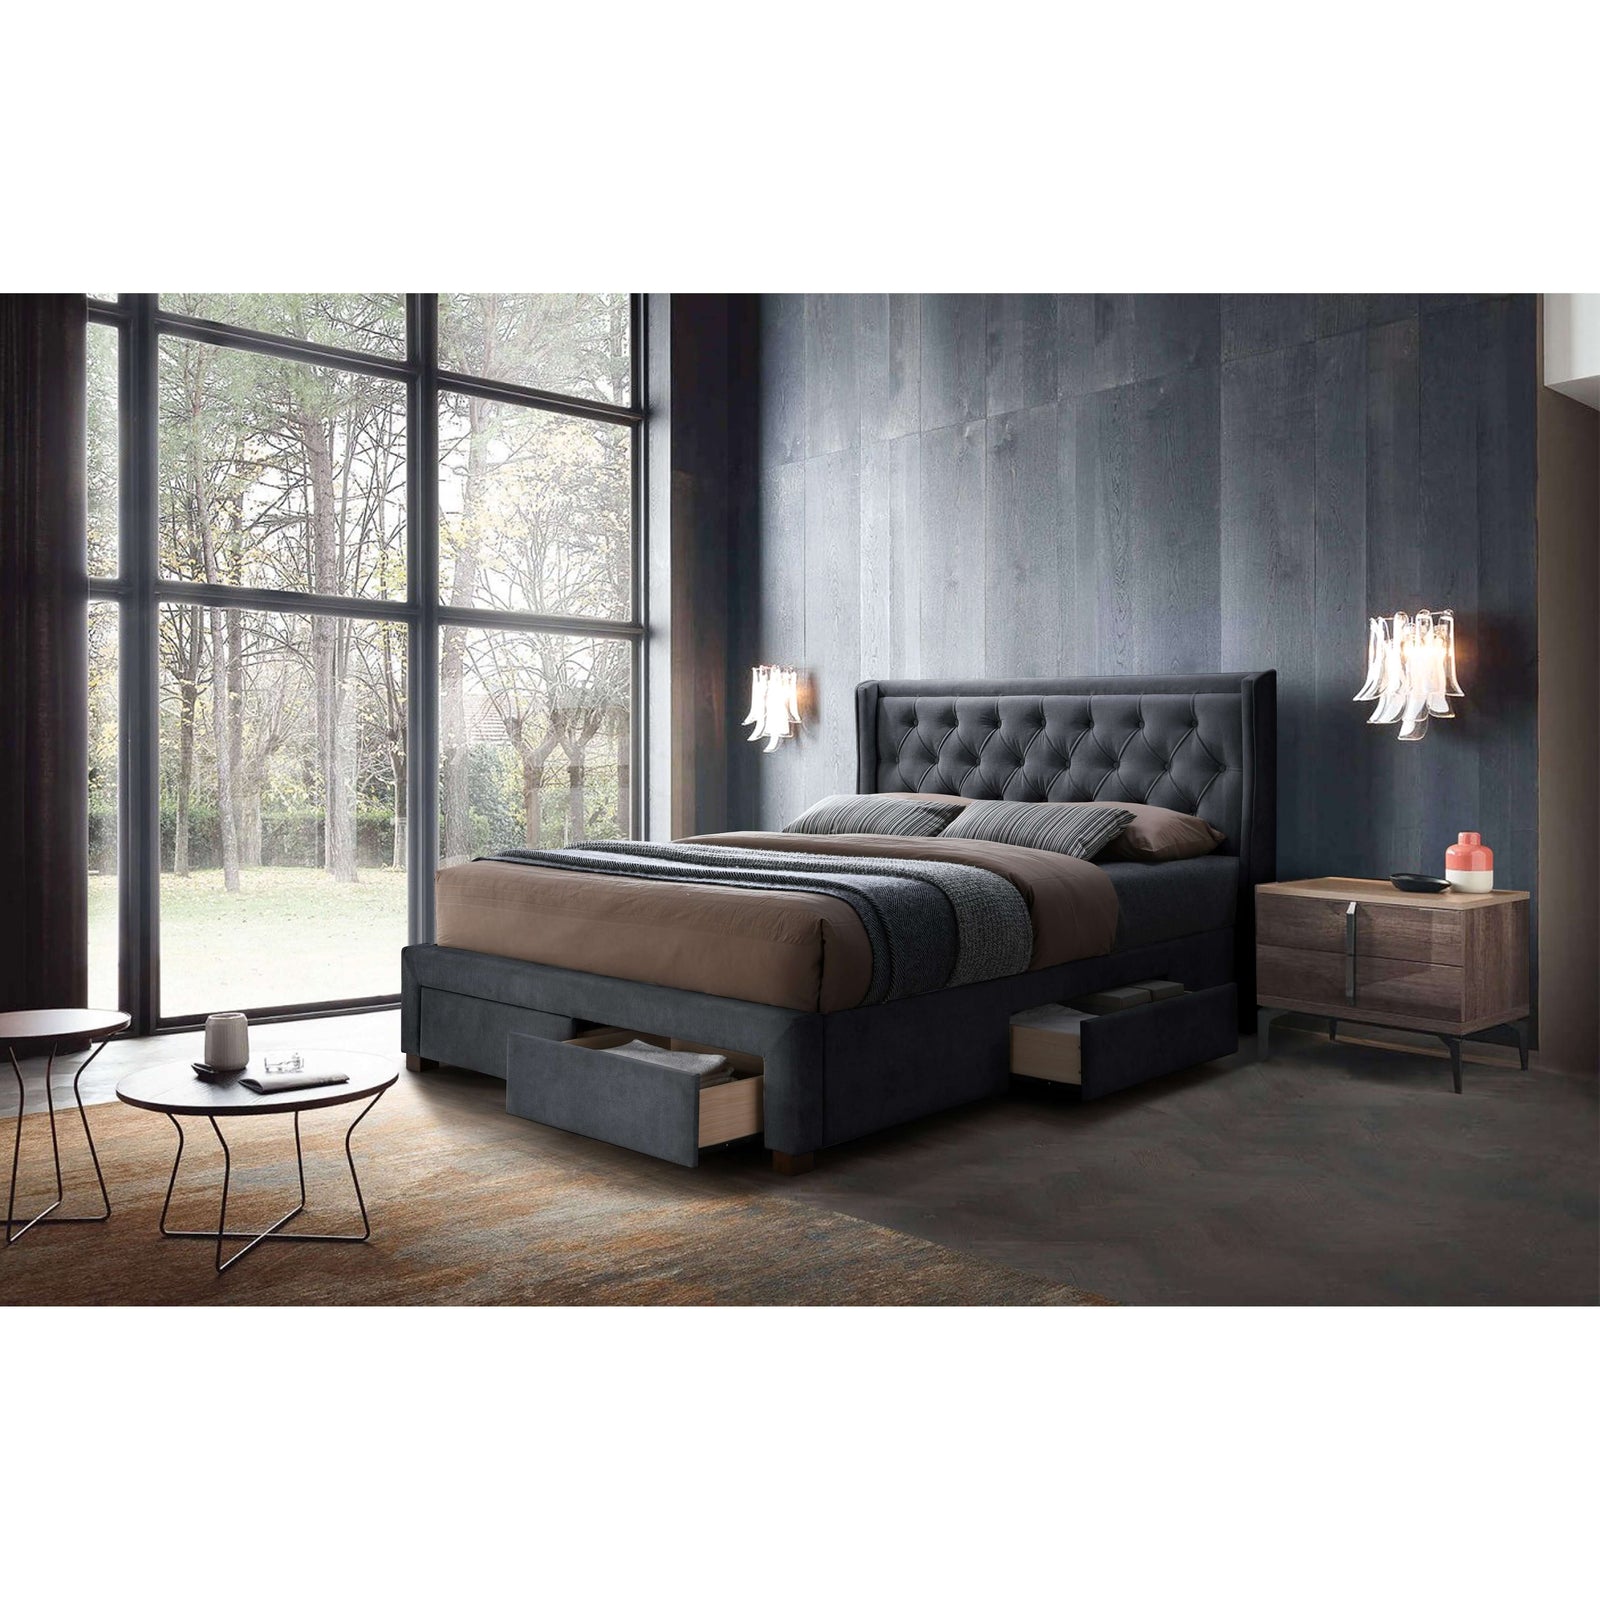 Softouch Queen Size Bed Frame Timber Mattress Base With Storage Drawers - Grey-Upinteriors